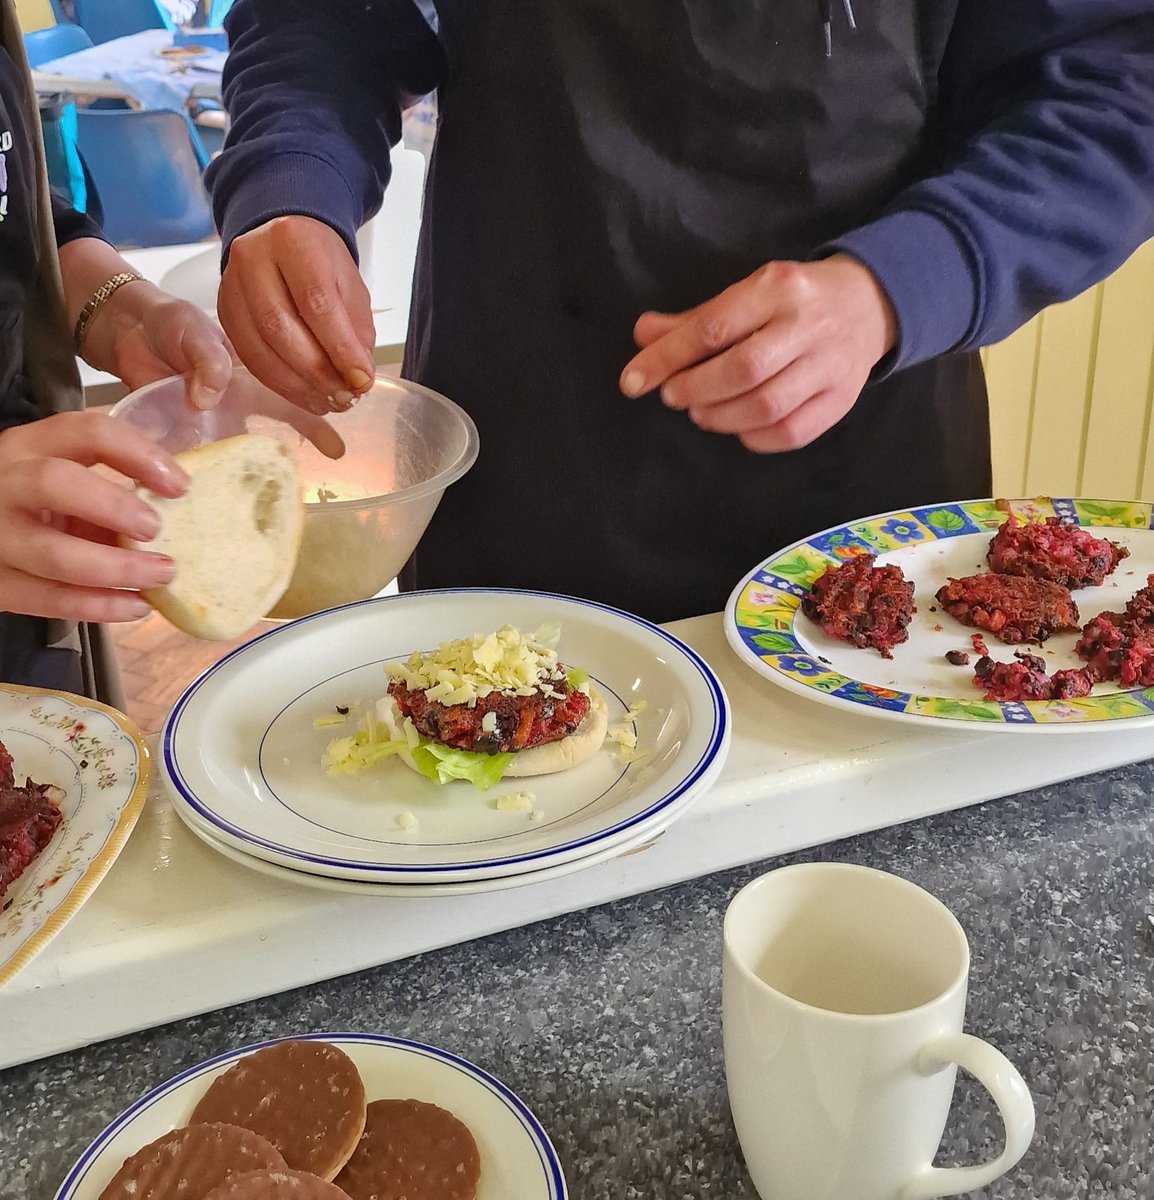 We love cooking in the community! Callum and Sarah nailed our veggie burger recipe at Hungerford Methodist Church Hall.
#healthyrecipes #cookingonabudget 
 @ILoveHungerford